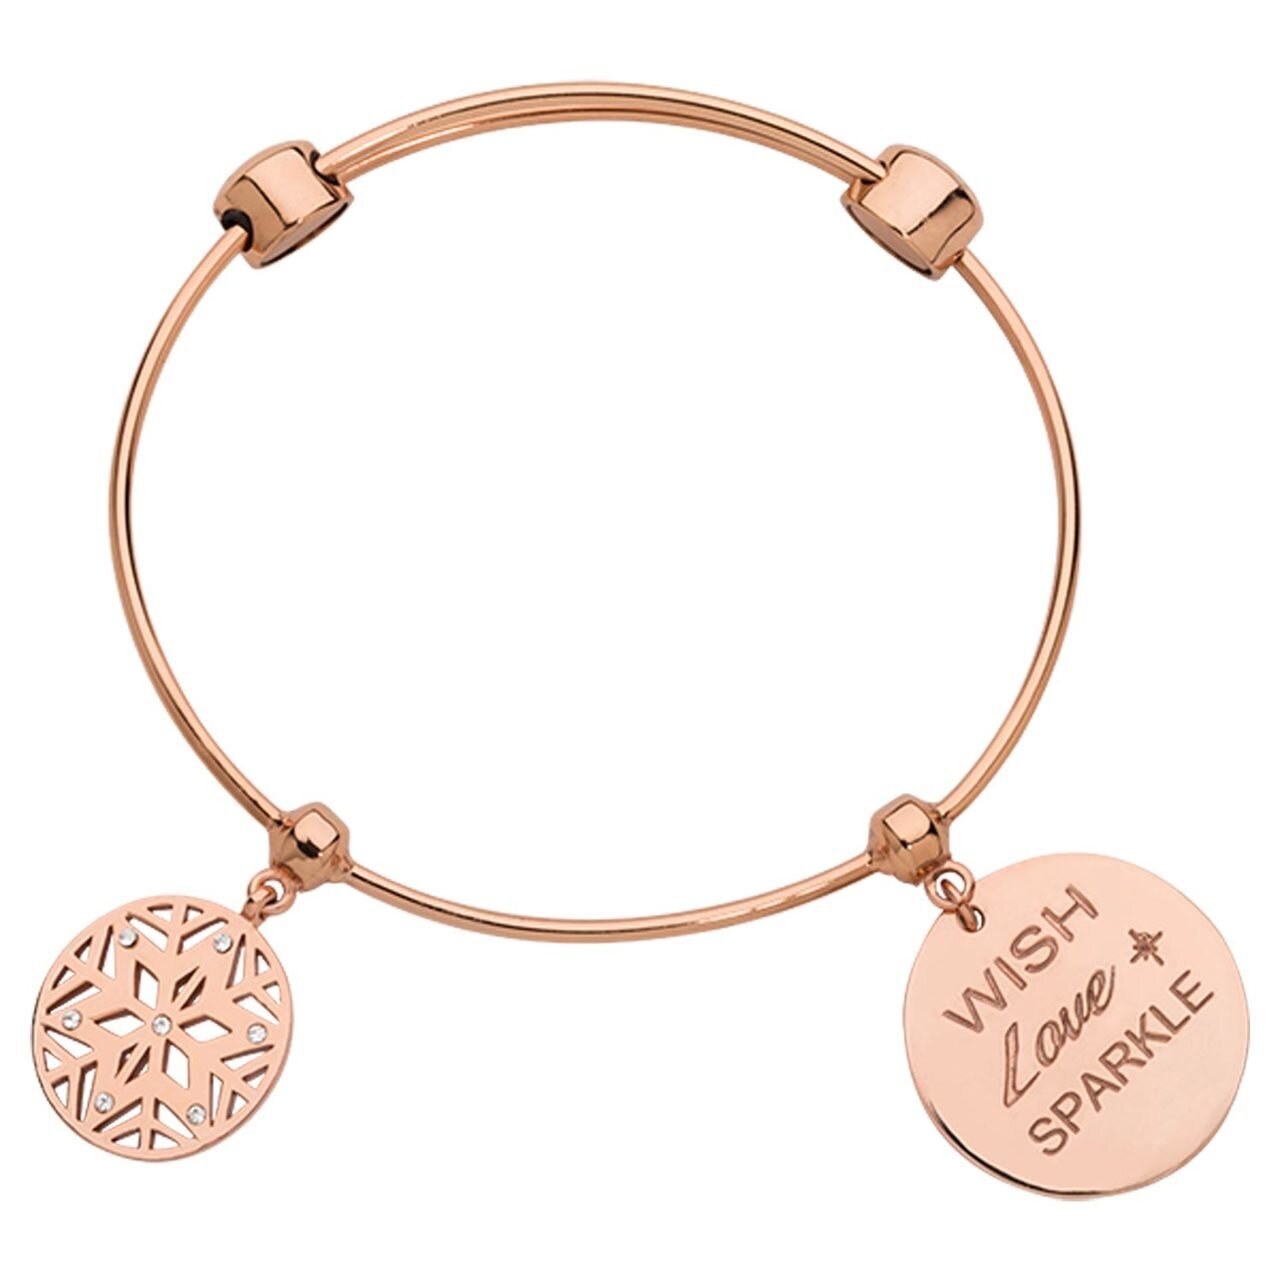 Nikki Lissoni Charm Bangle with Two Fixed Charms Snowflake Wish Love Sparkle Rose Gold-plated 19cm B1163RG19